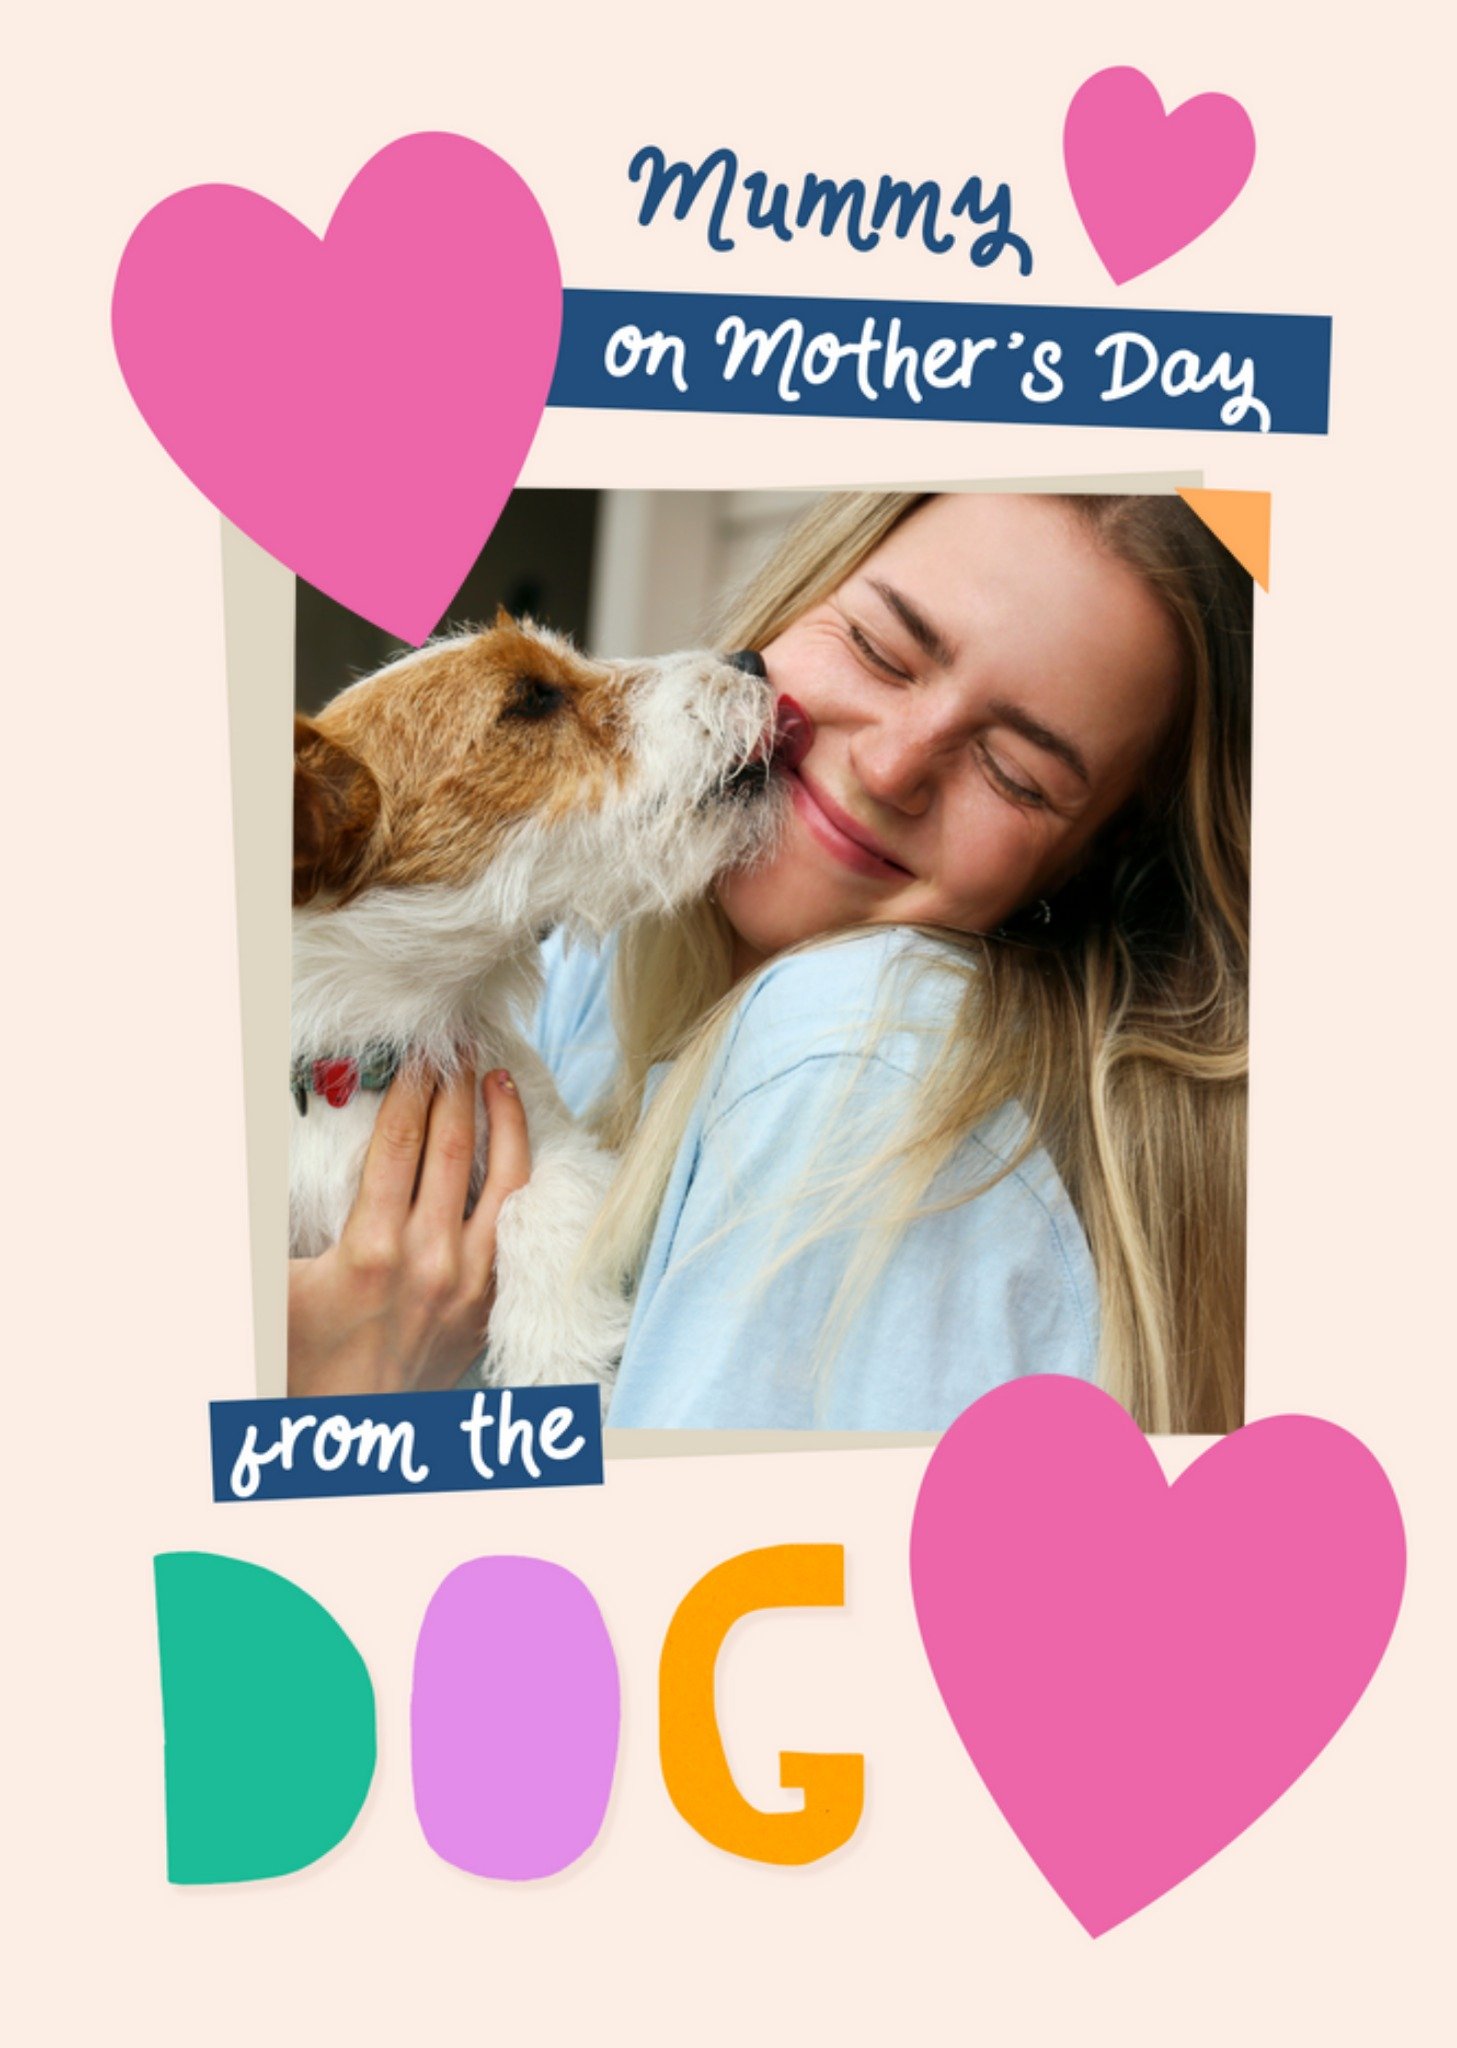 Moonpig Love And Joy Mummy On Mother's Day From The Dog Love Hearts Photo Upload Mother's Day Card E